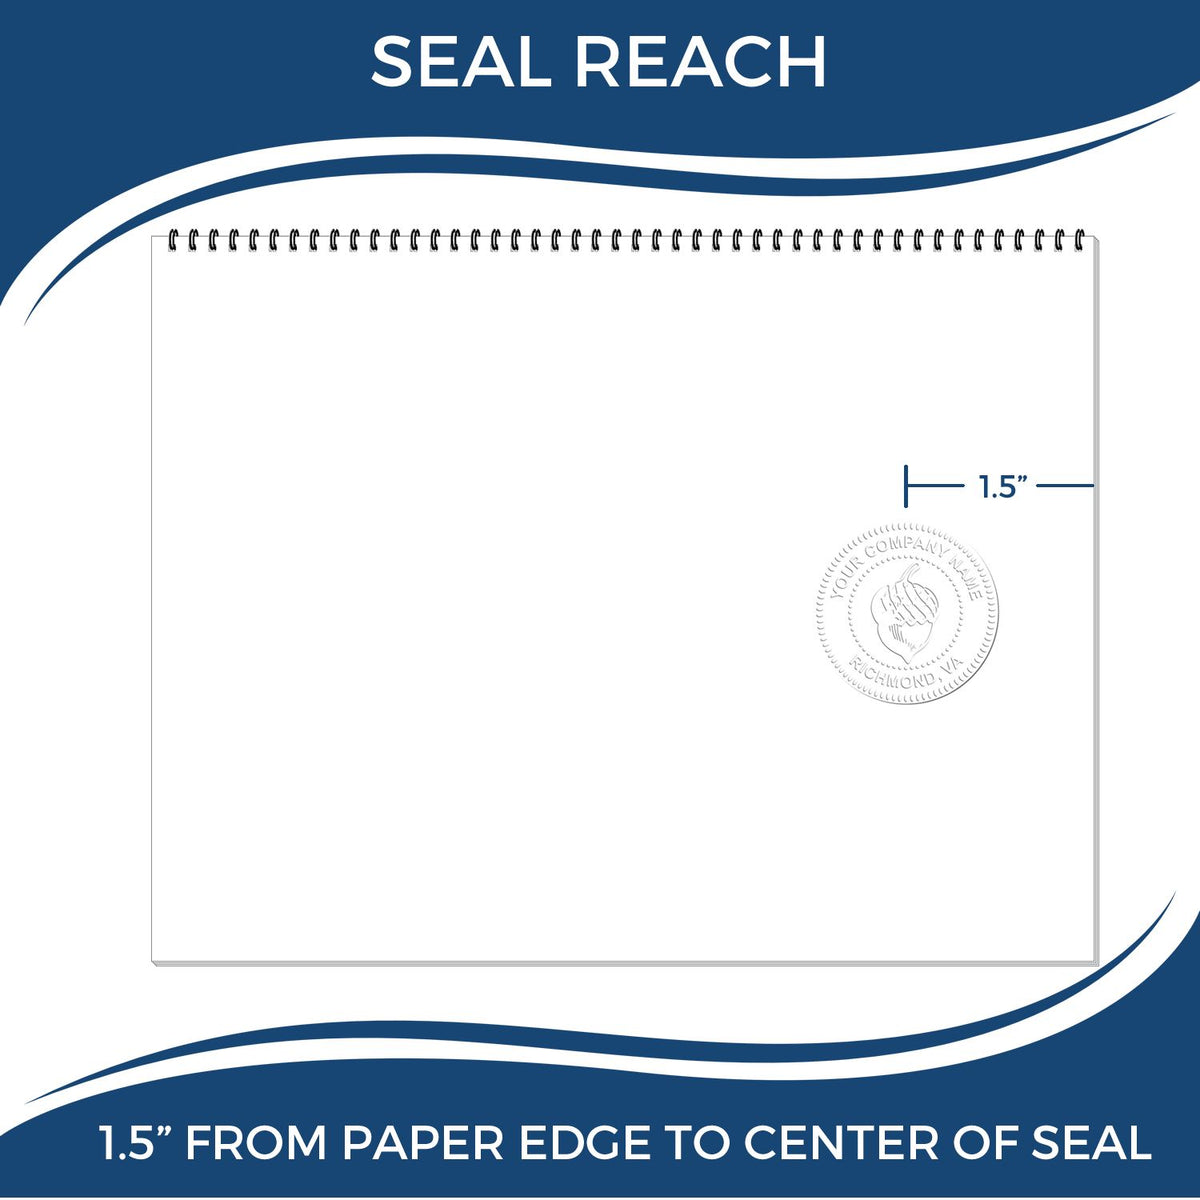 An infographic showing the seal reach which is represented by a ruler and a miniature seal image of the Gift Delaware Landscape Architect Seal